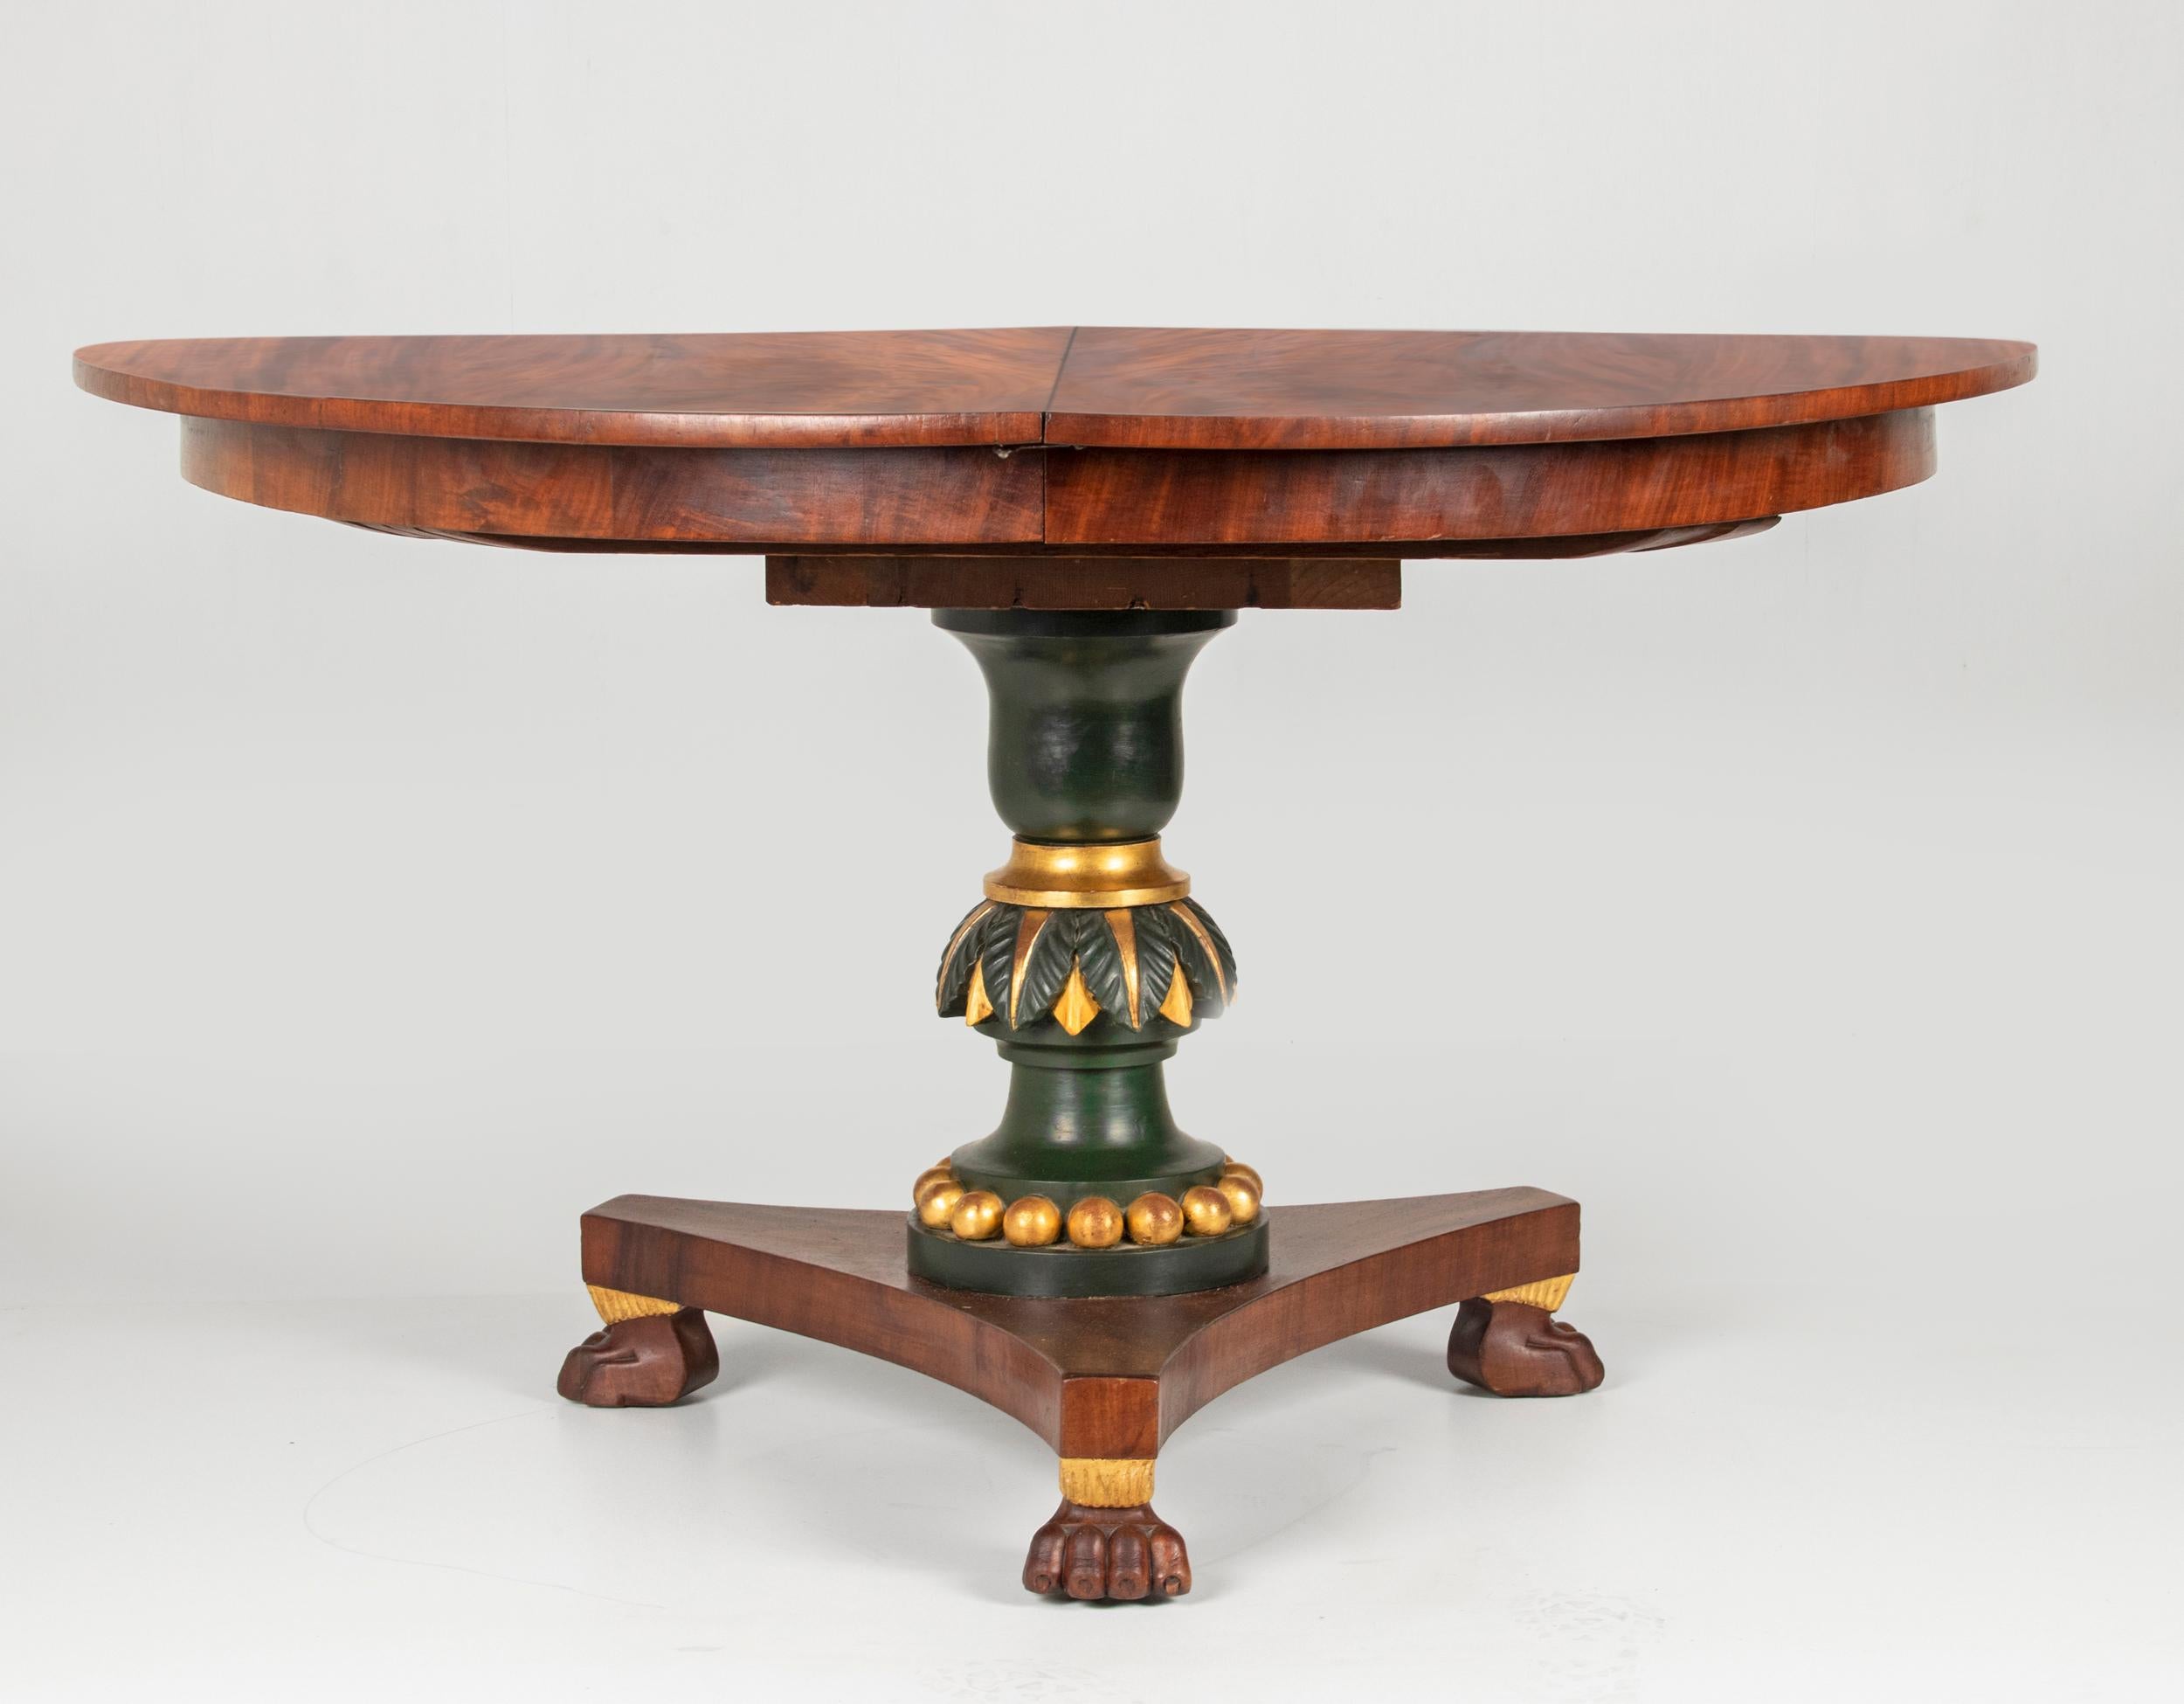 An antique Empire period dining room table. This more than 200 years old table is made of mahogany venee. The top rests on a three-legged base, on carved lion-claw legs. The column is dark green patinated with gold leaf accents. This table is also